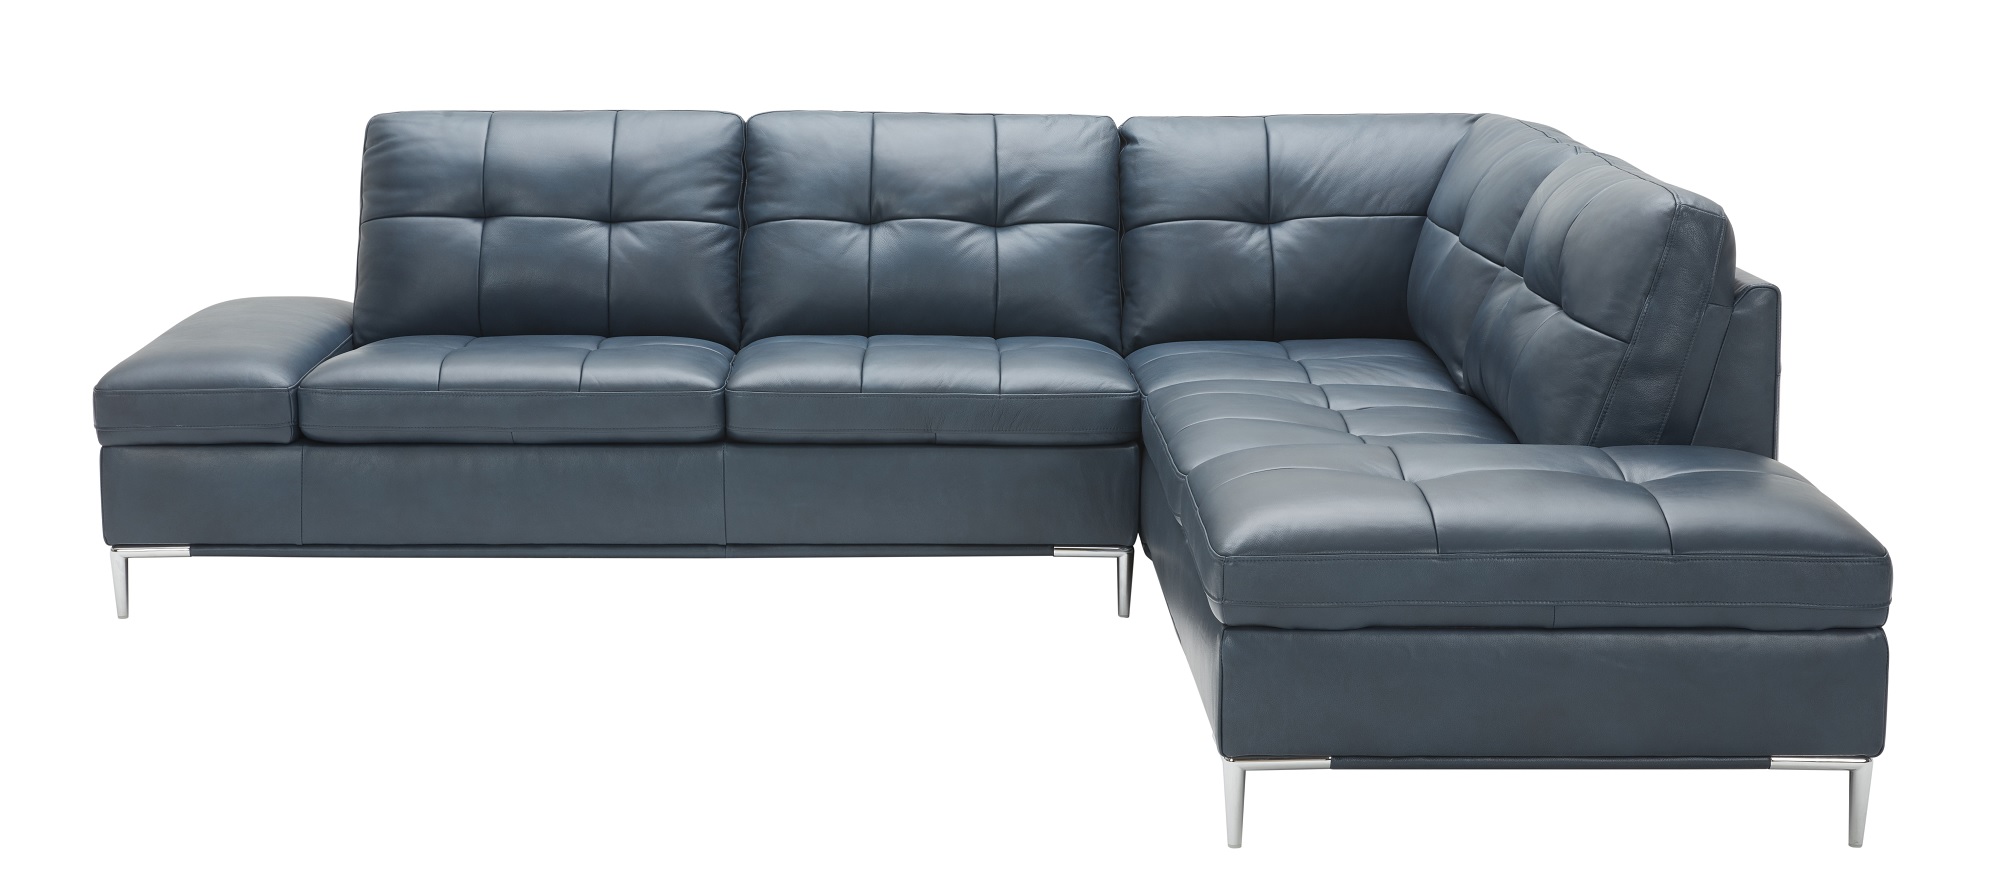 Advanced Adjustable Tufted Leather Corner Sectional Sofa with Pillows - Click Image to Close